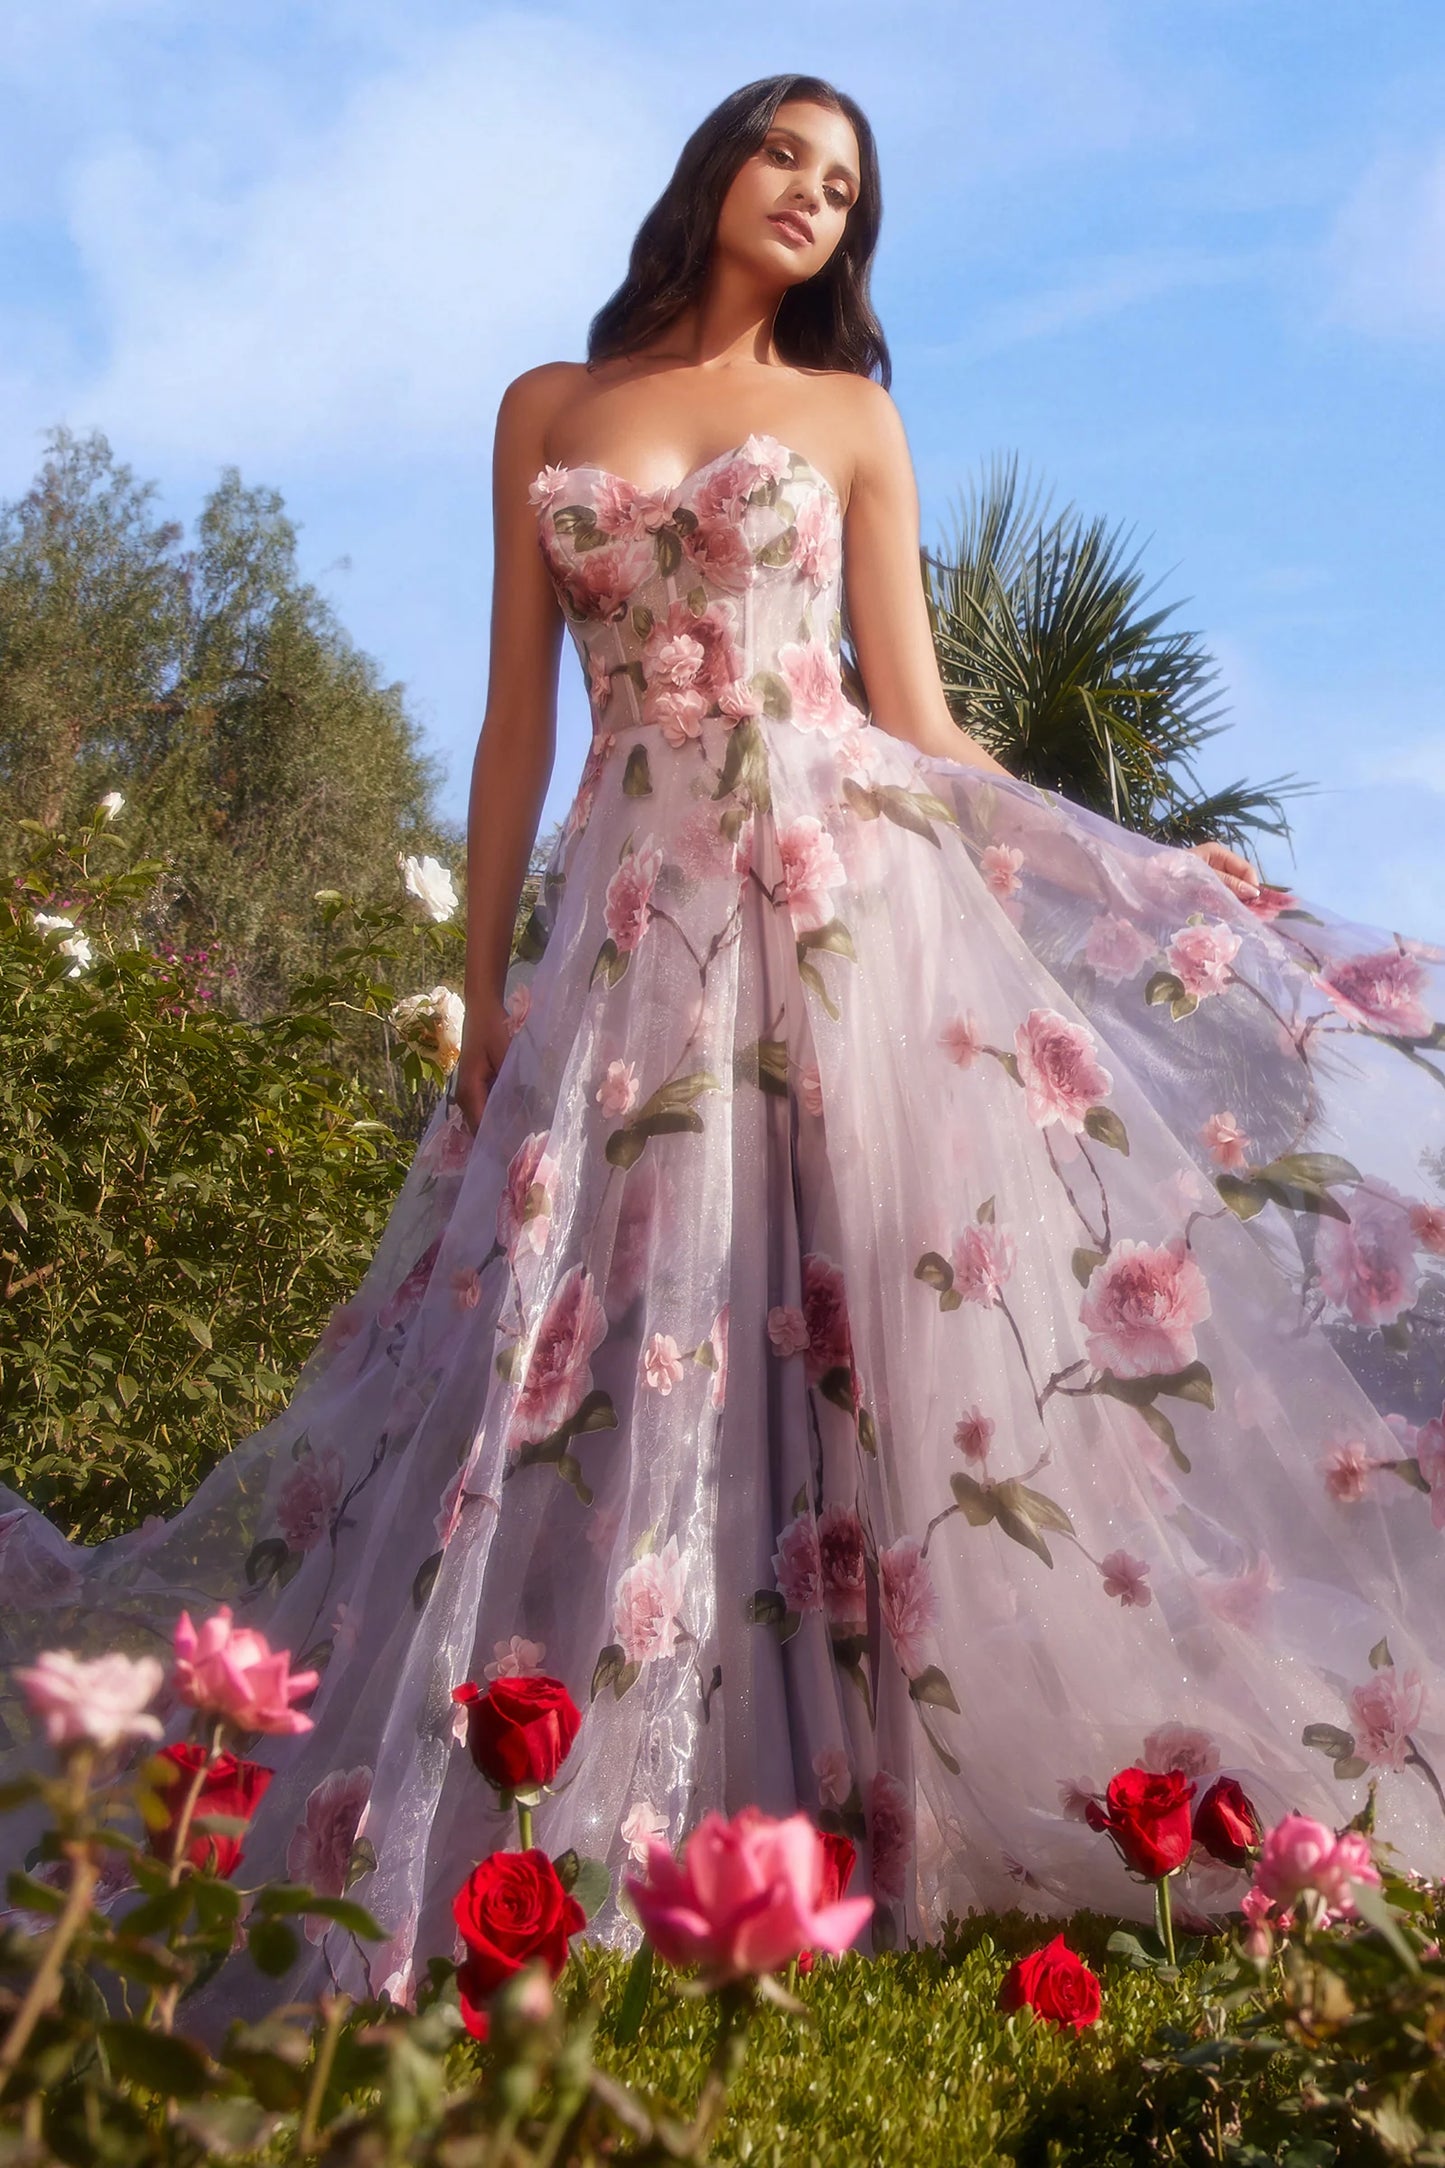 Andrea & Leo Couture A1035  Welcome to the fairytale world of magic and enchantment in this breathtaking A-line gown. This best selling gown is crafted from luxe Organza fabric, showing off an array of dimensional floral appliques and pink rose print. The strapless bodice features a sheer corset design, flaunting an ethereal blushing pink hue beneath a flourish of intricate roses and petals along the body. And